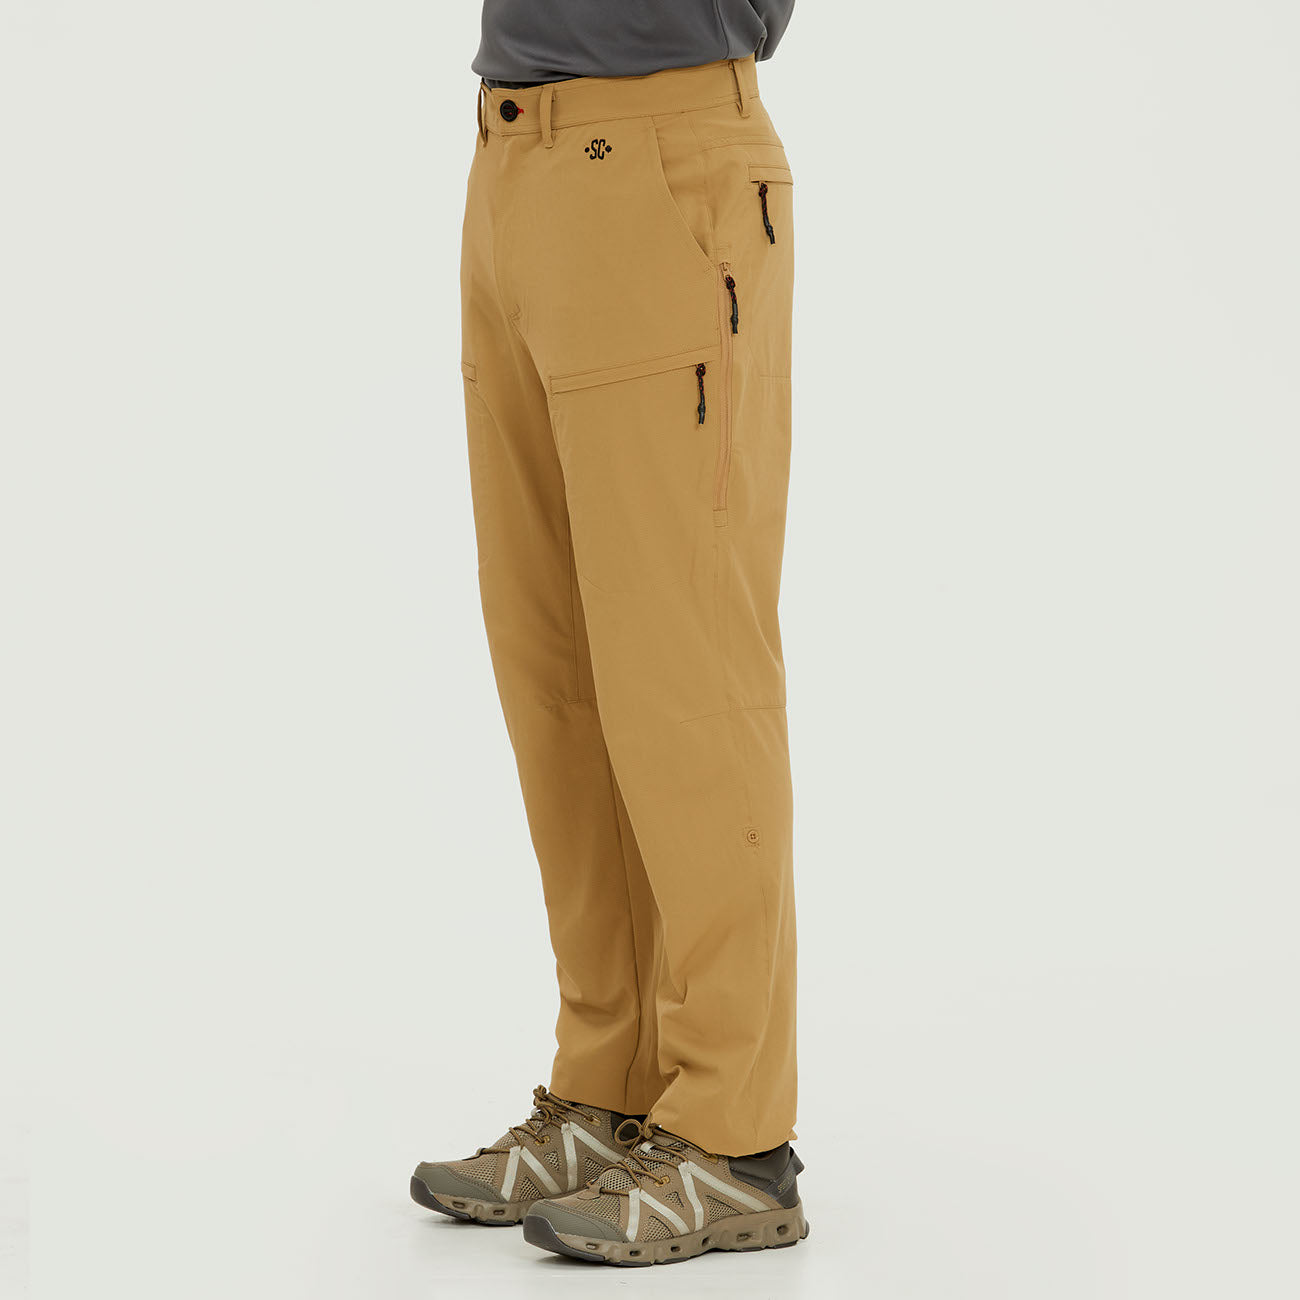 "Fraser" fishing and outdoor pants for men